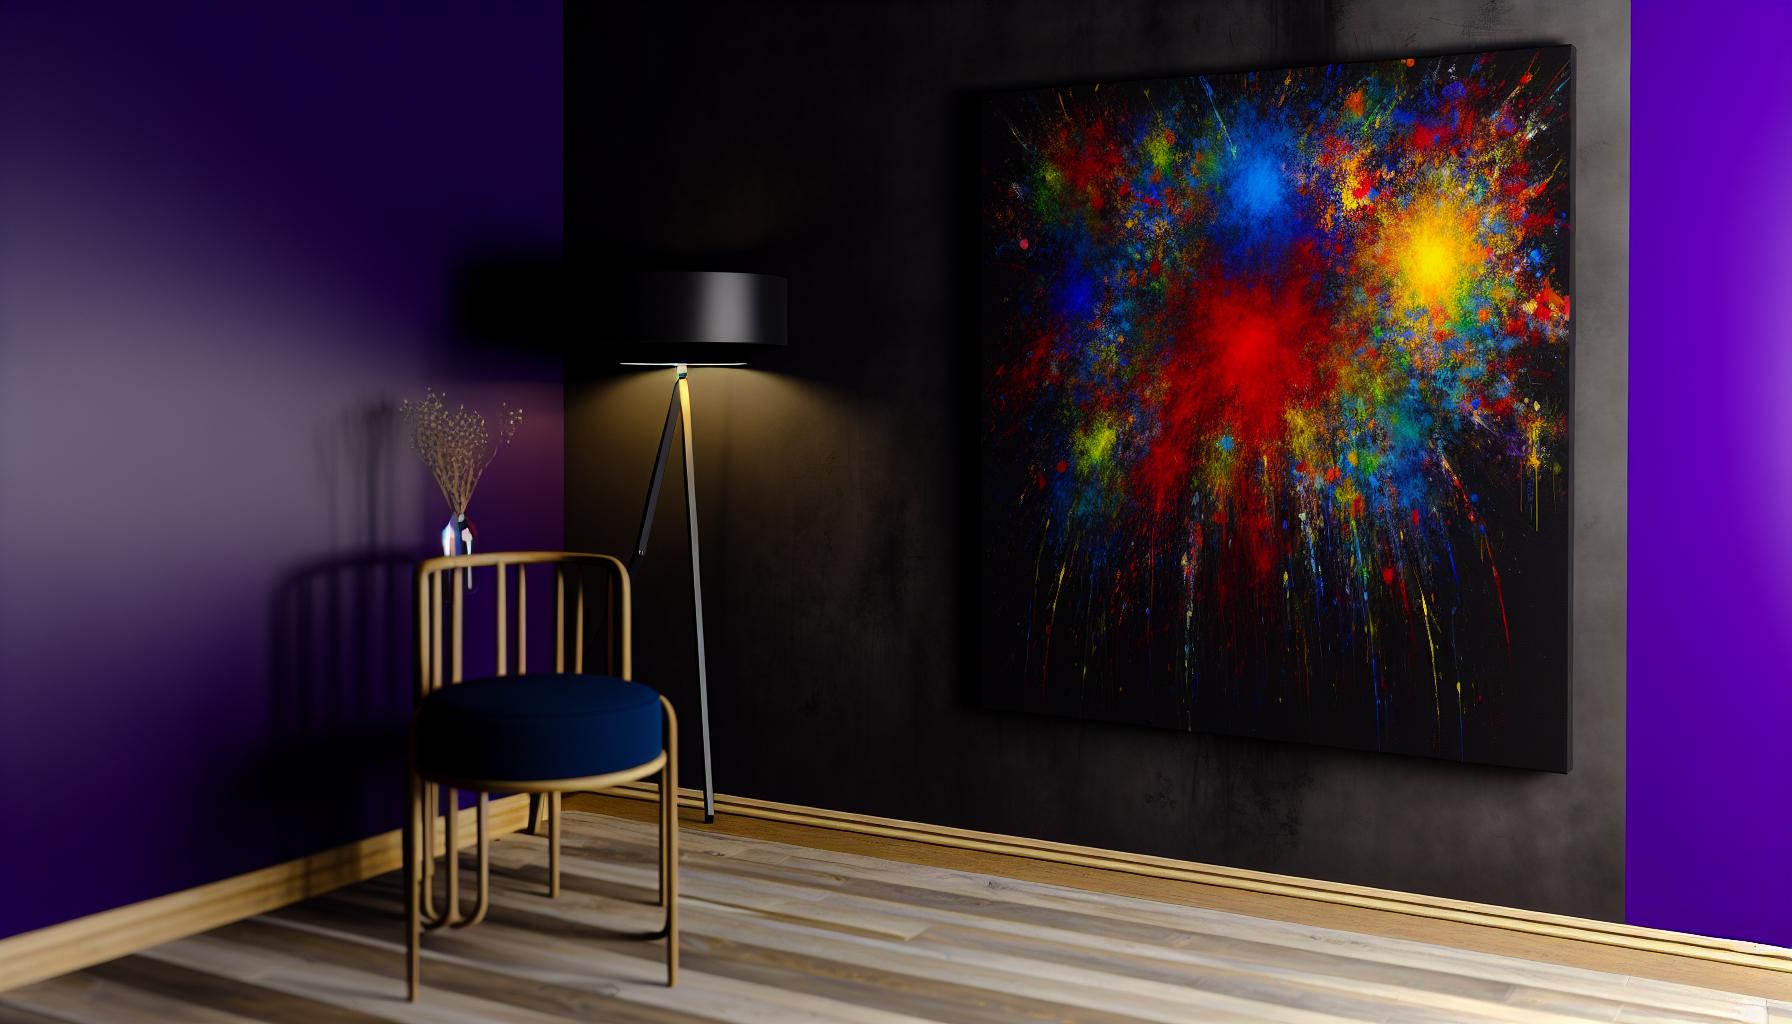 Black wall art with vibrant pops of color creating a visually striking display